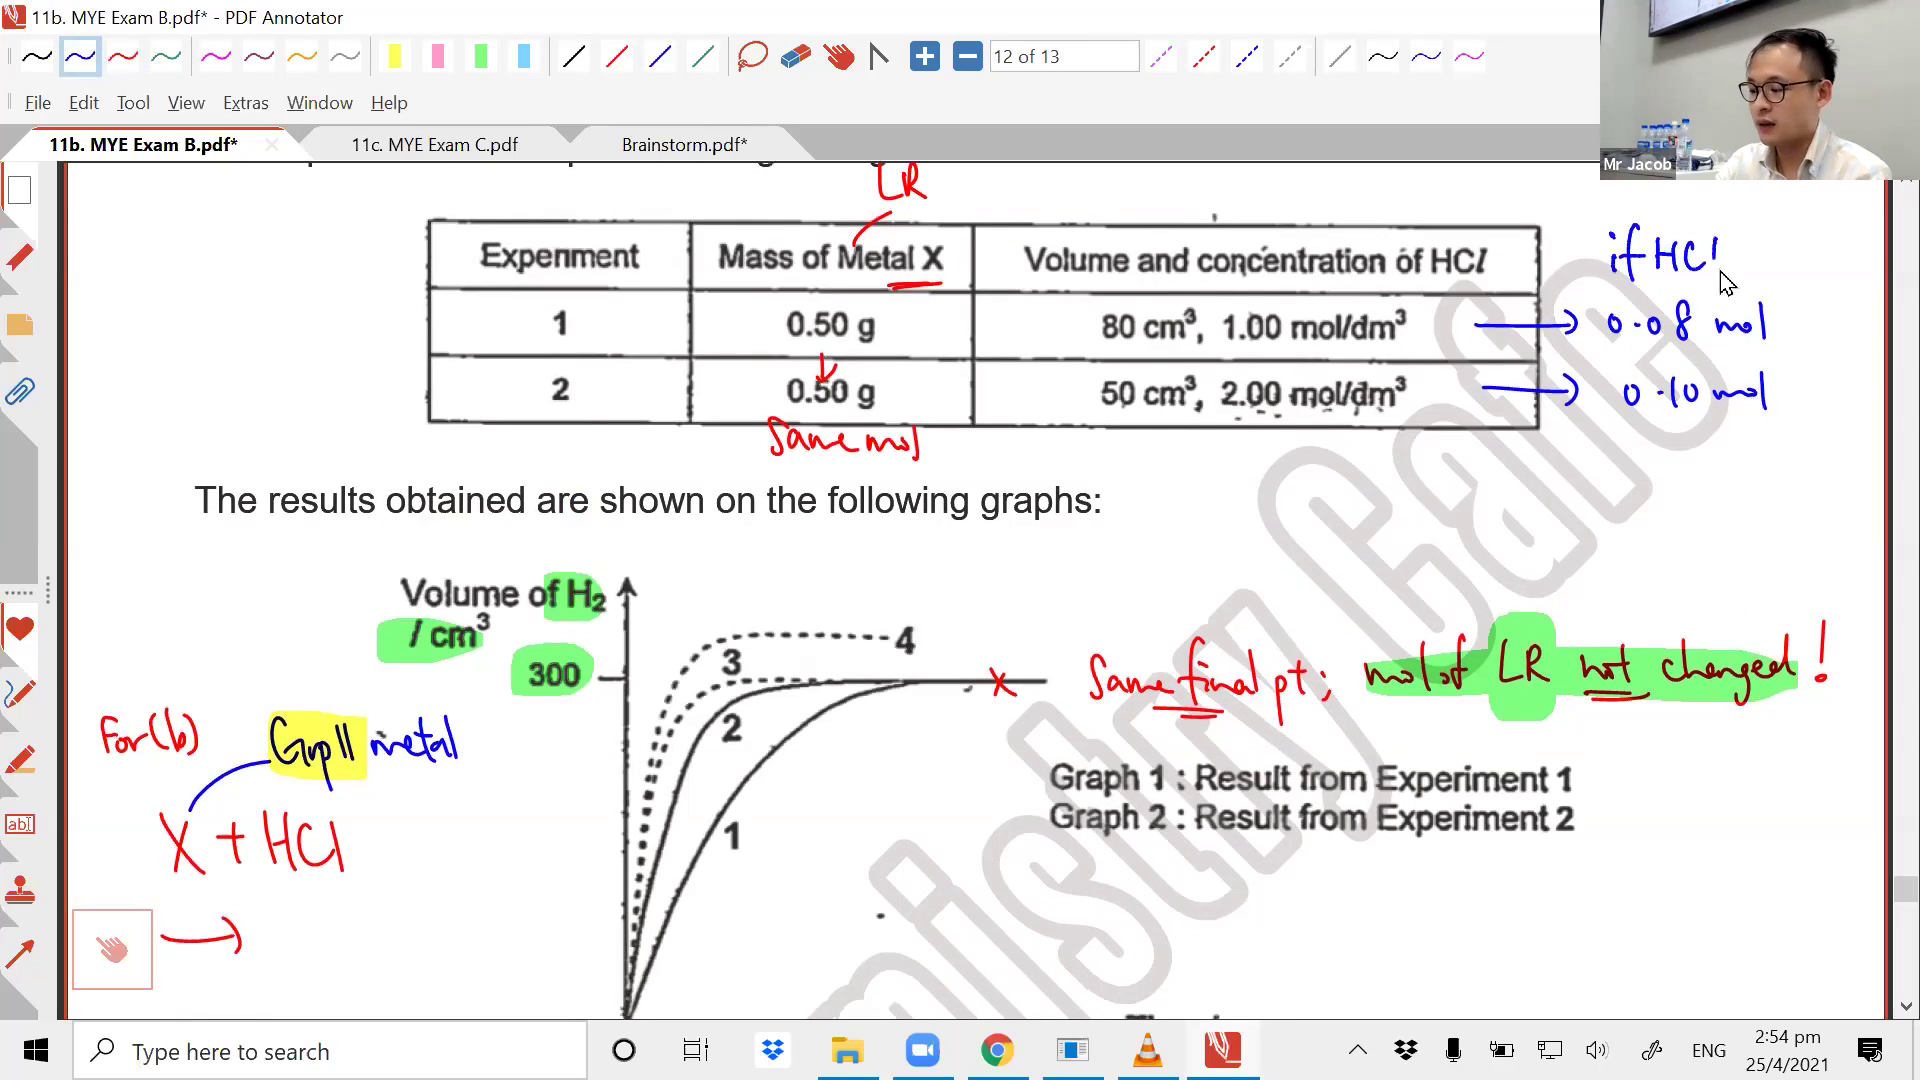 [SPEED OF REACTION] Measurement and Calculations